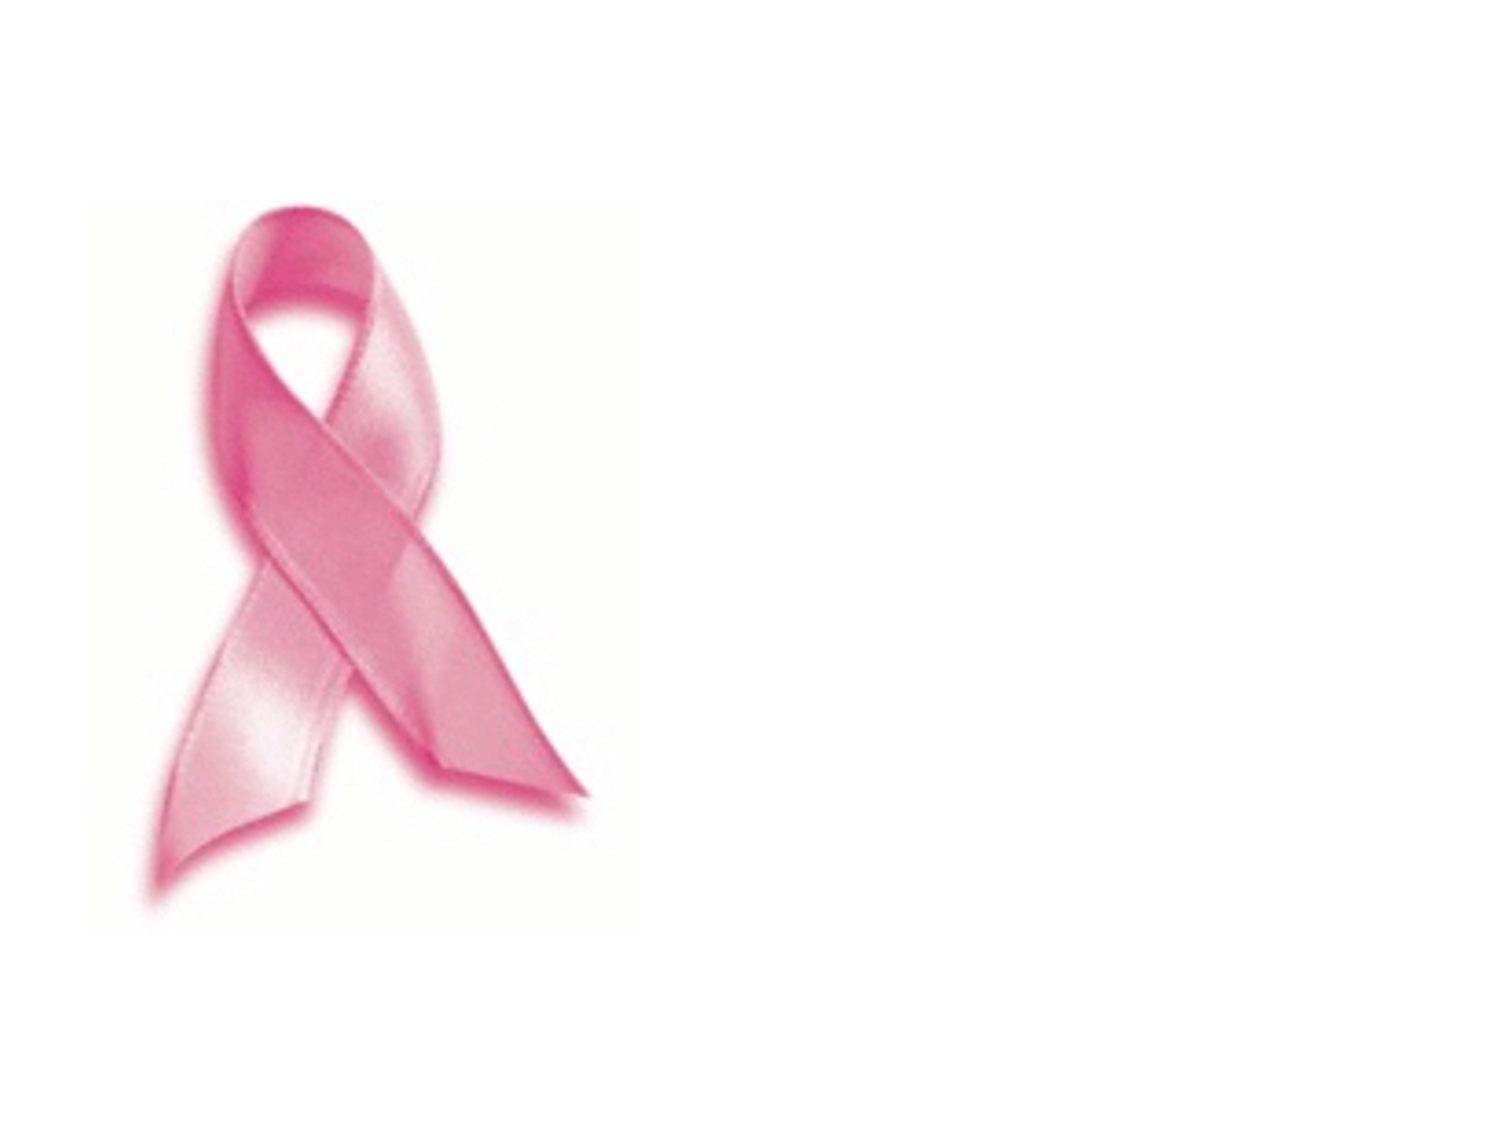 Displaying Image For Breast Cancer Awareness Background